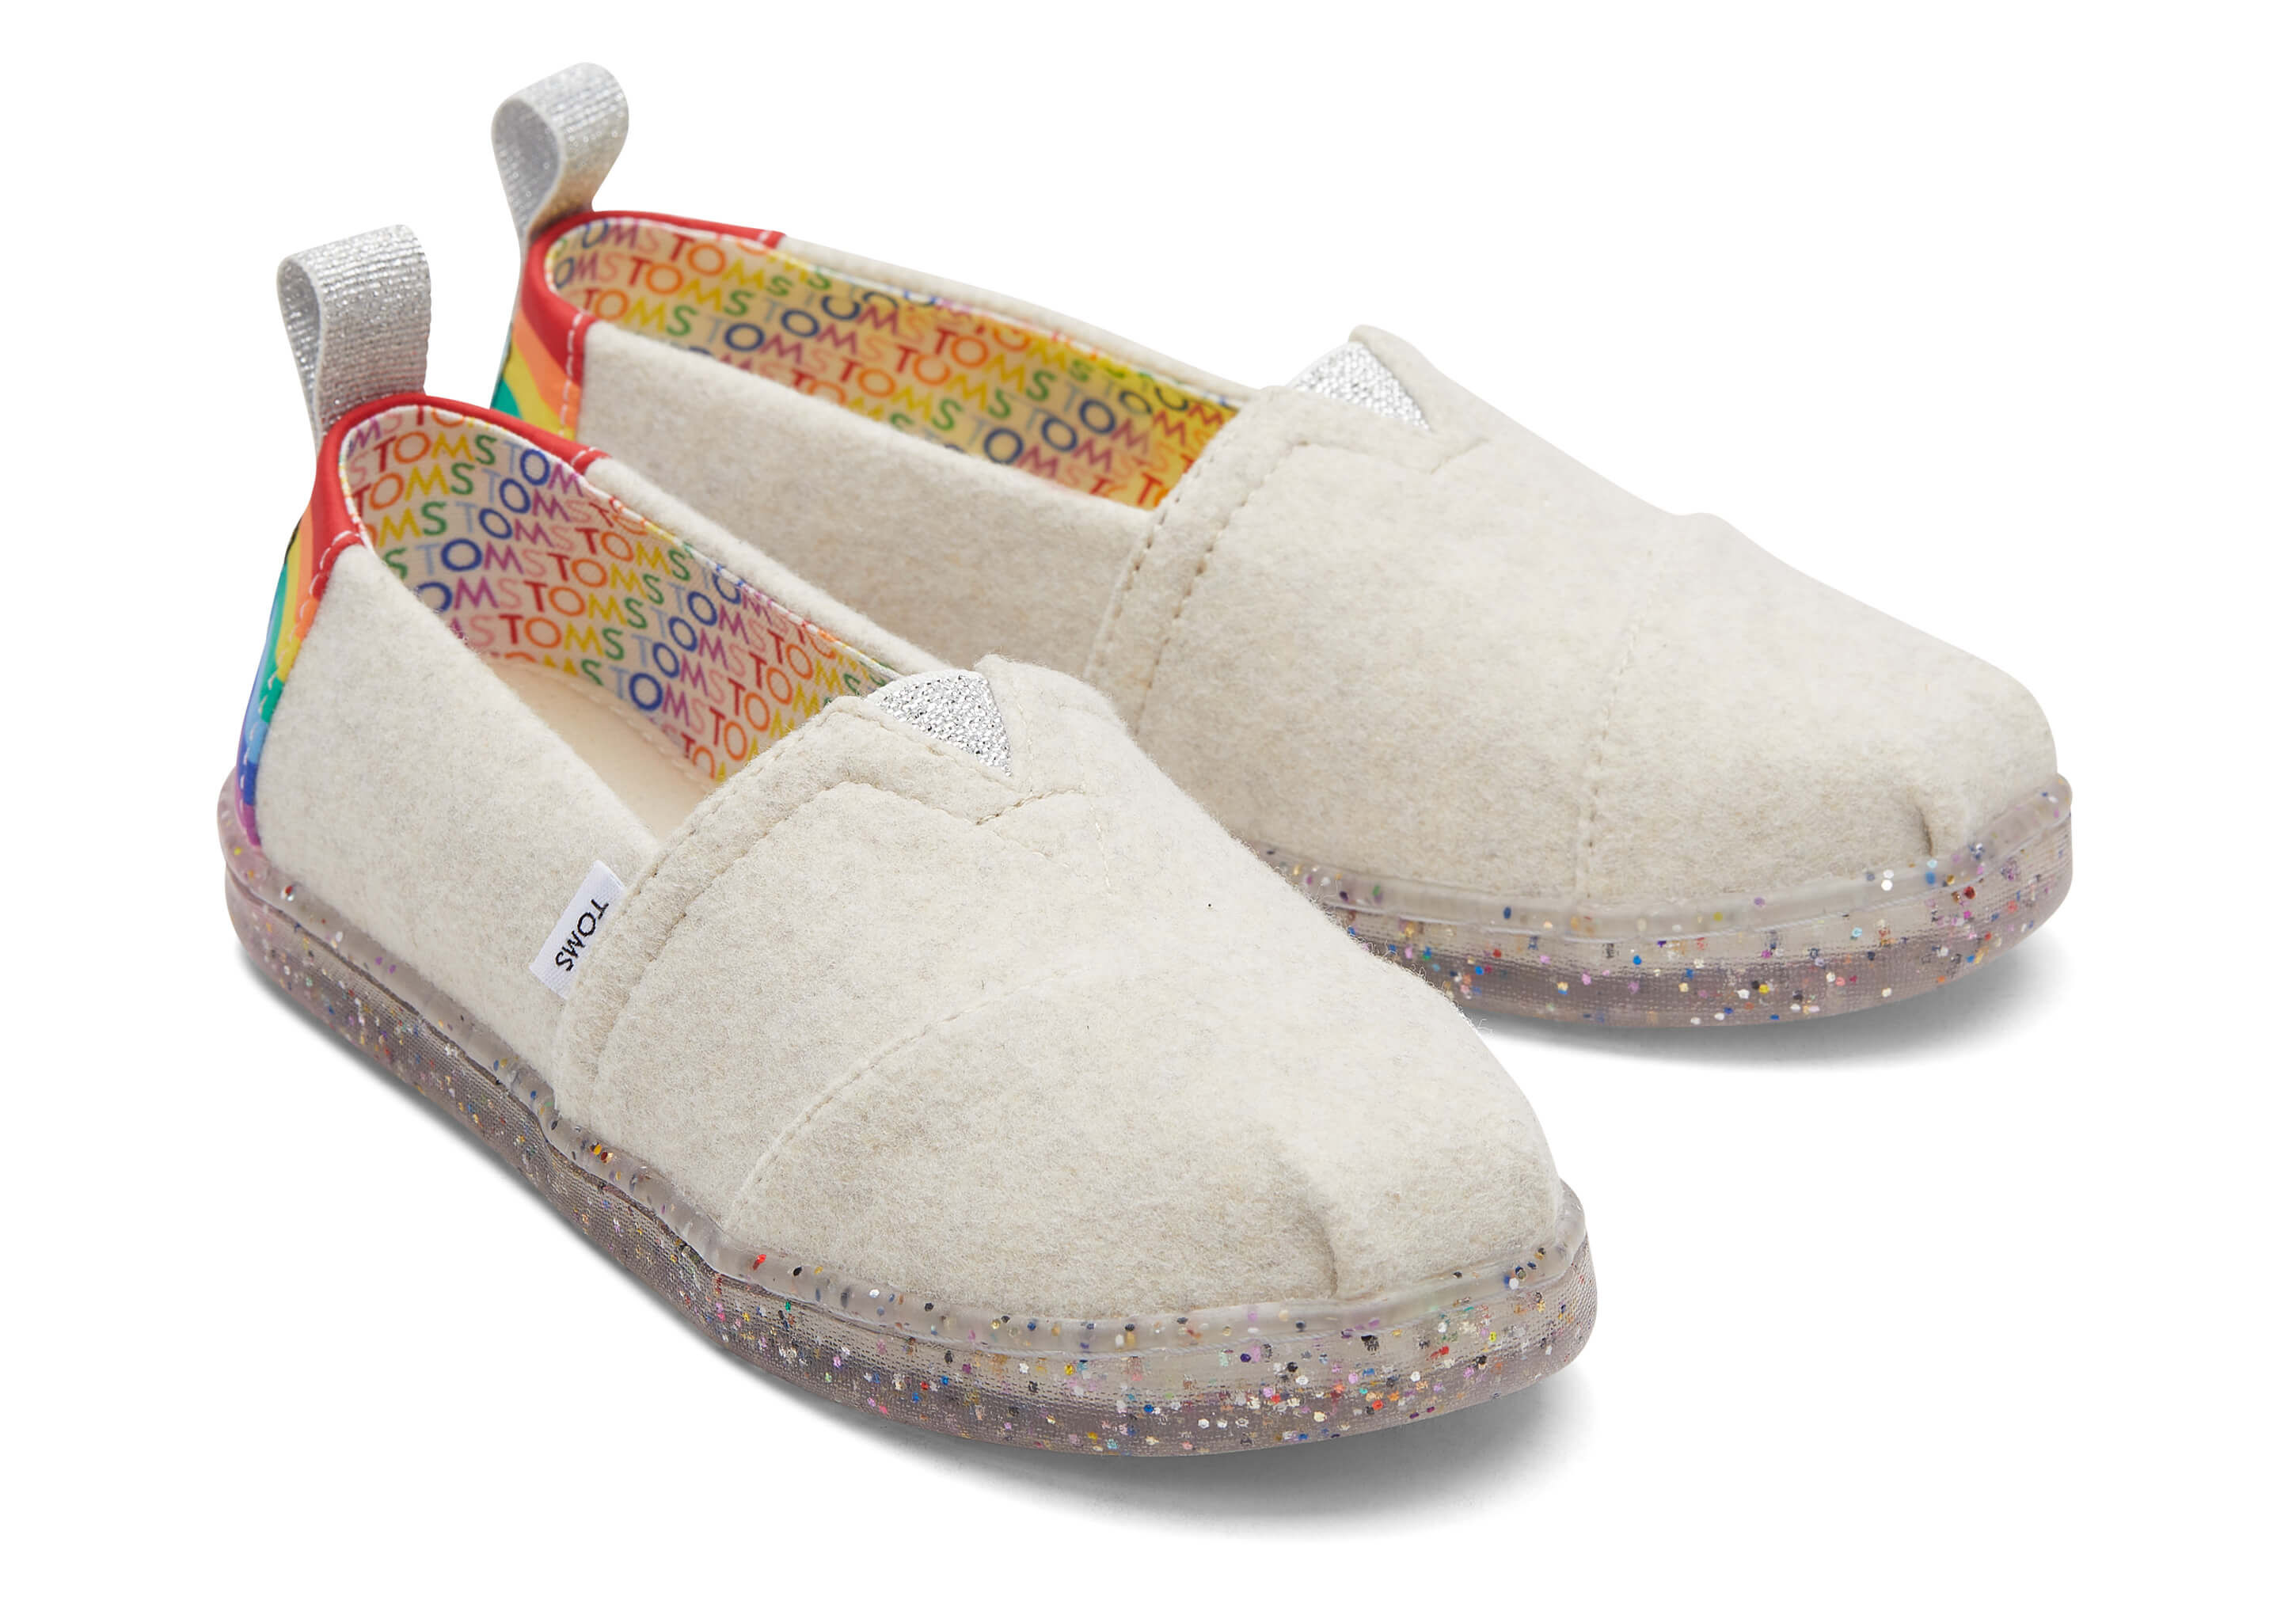 Kids' Shoes for Girls | TOMS